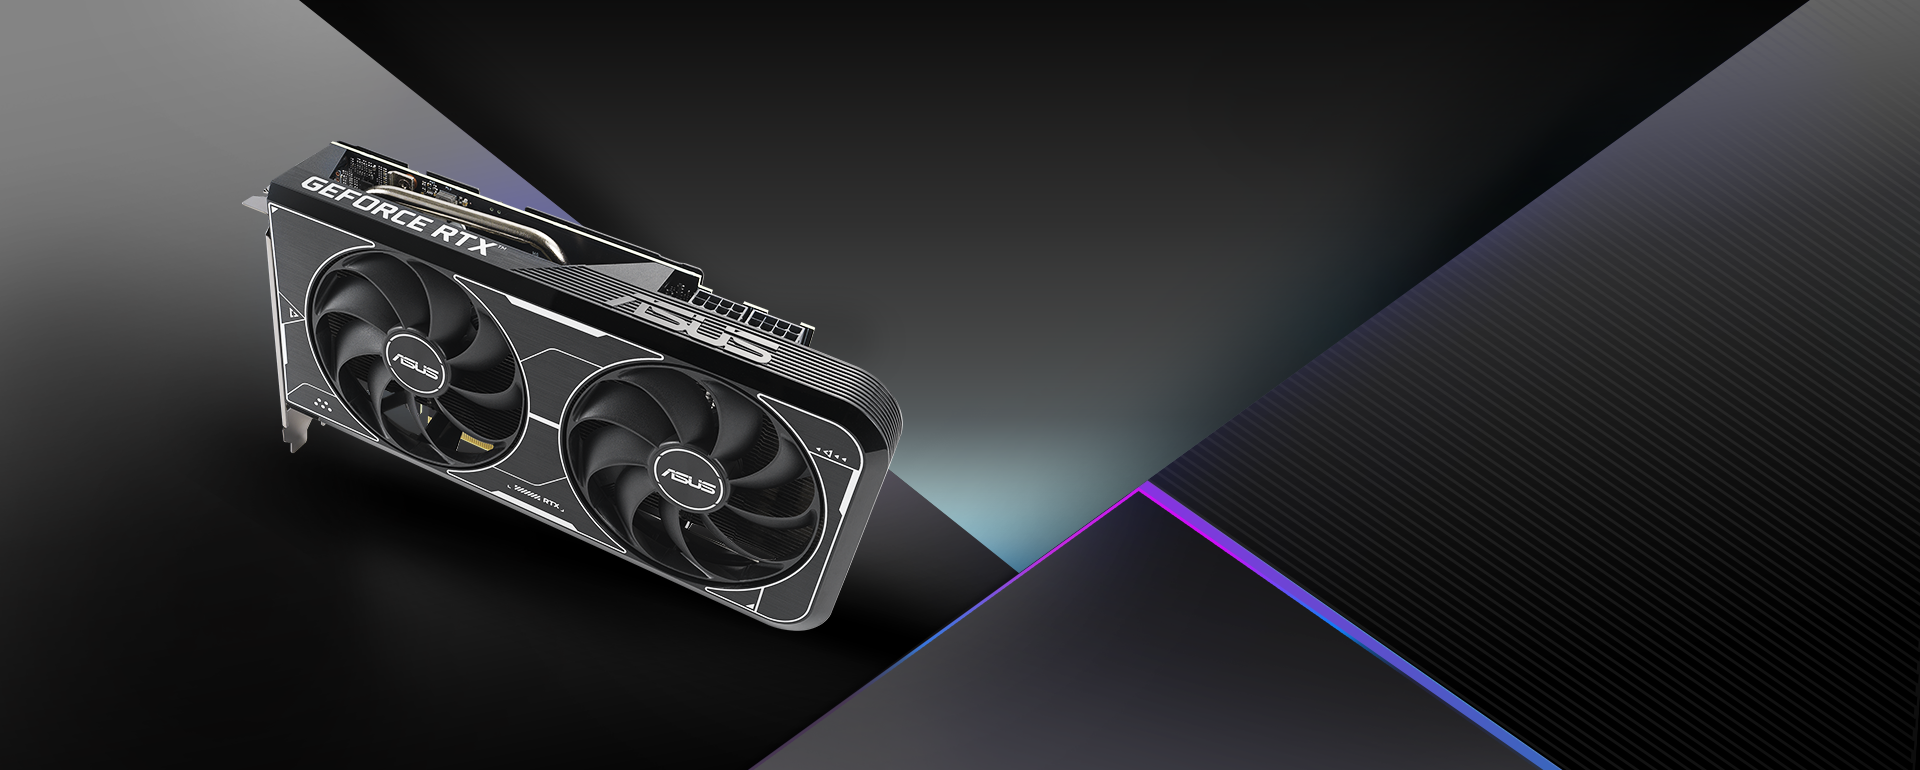 Front angled view of the ASUS Dual GeForce RTX 3060 Ti graphics card